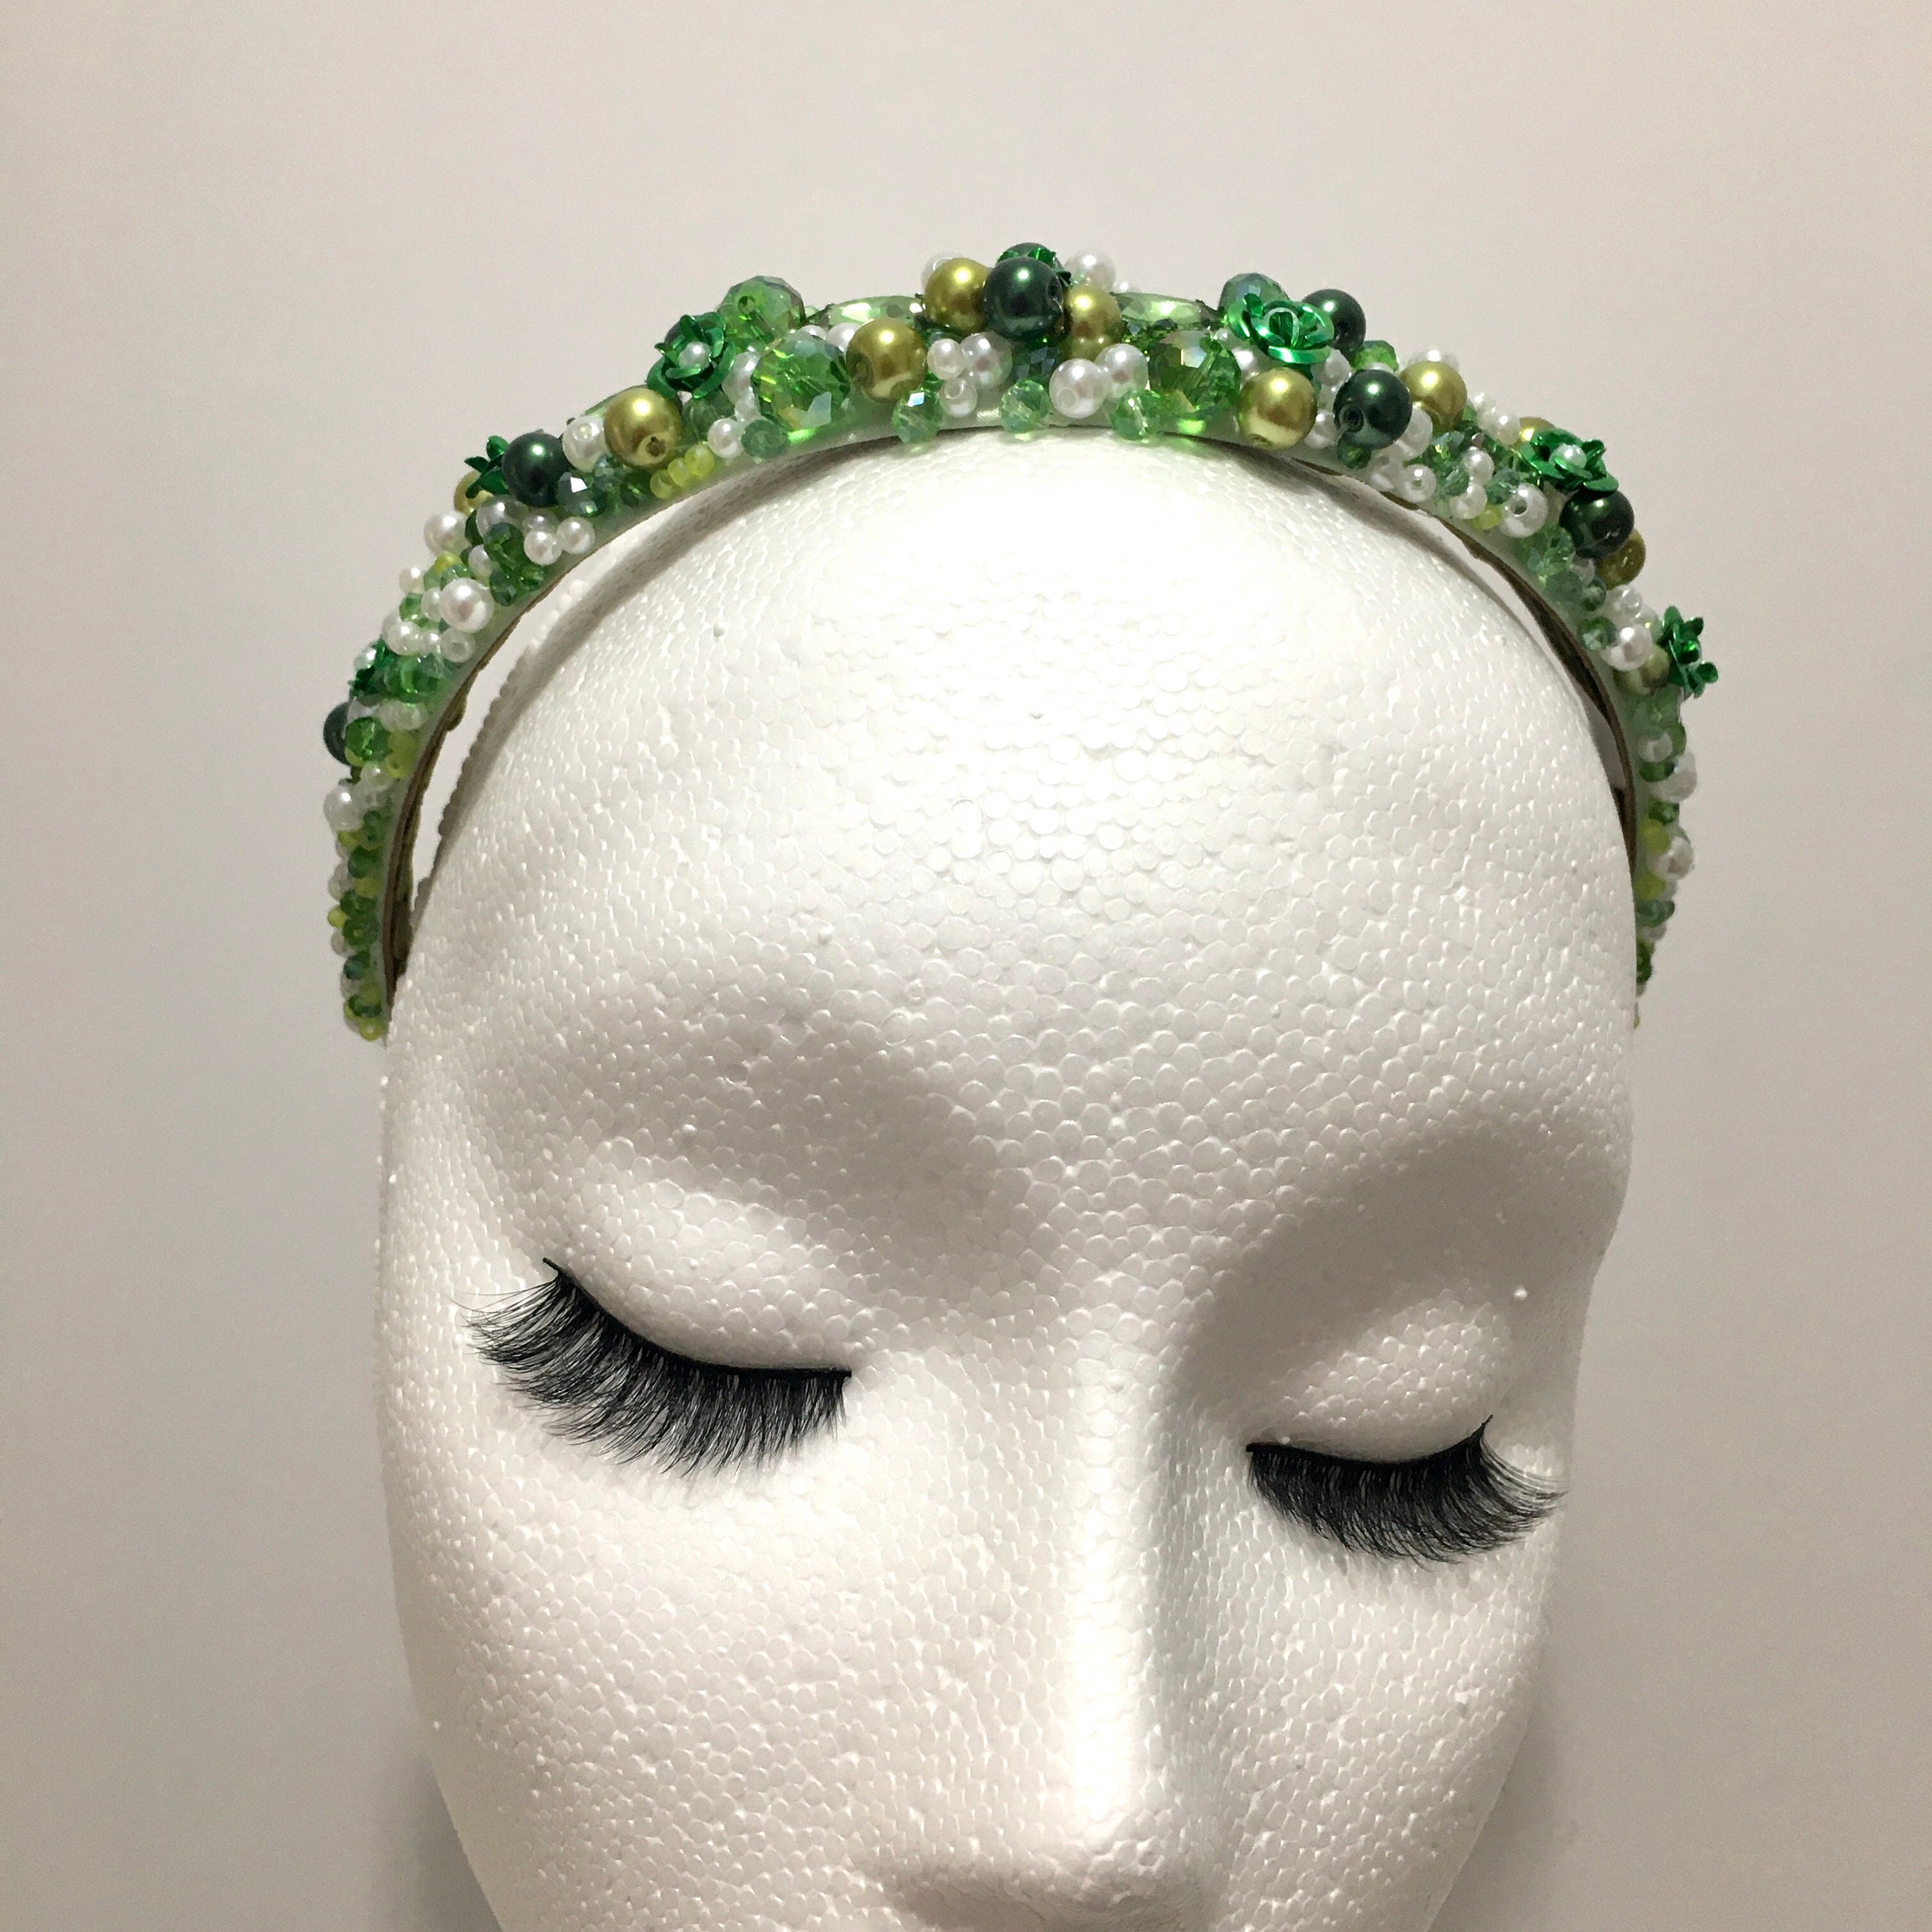 FRCOLOR 3pcs Leaf Crystal Headband Green Contacts for Eyes Green Headband  Jeweled Headbands for Women Hair Accessories for Bride Festival Hair  Accessories Miss Fancy Alloy Crown : : Fashion